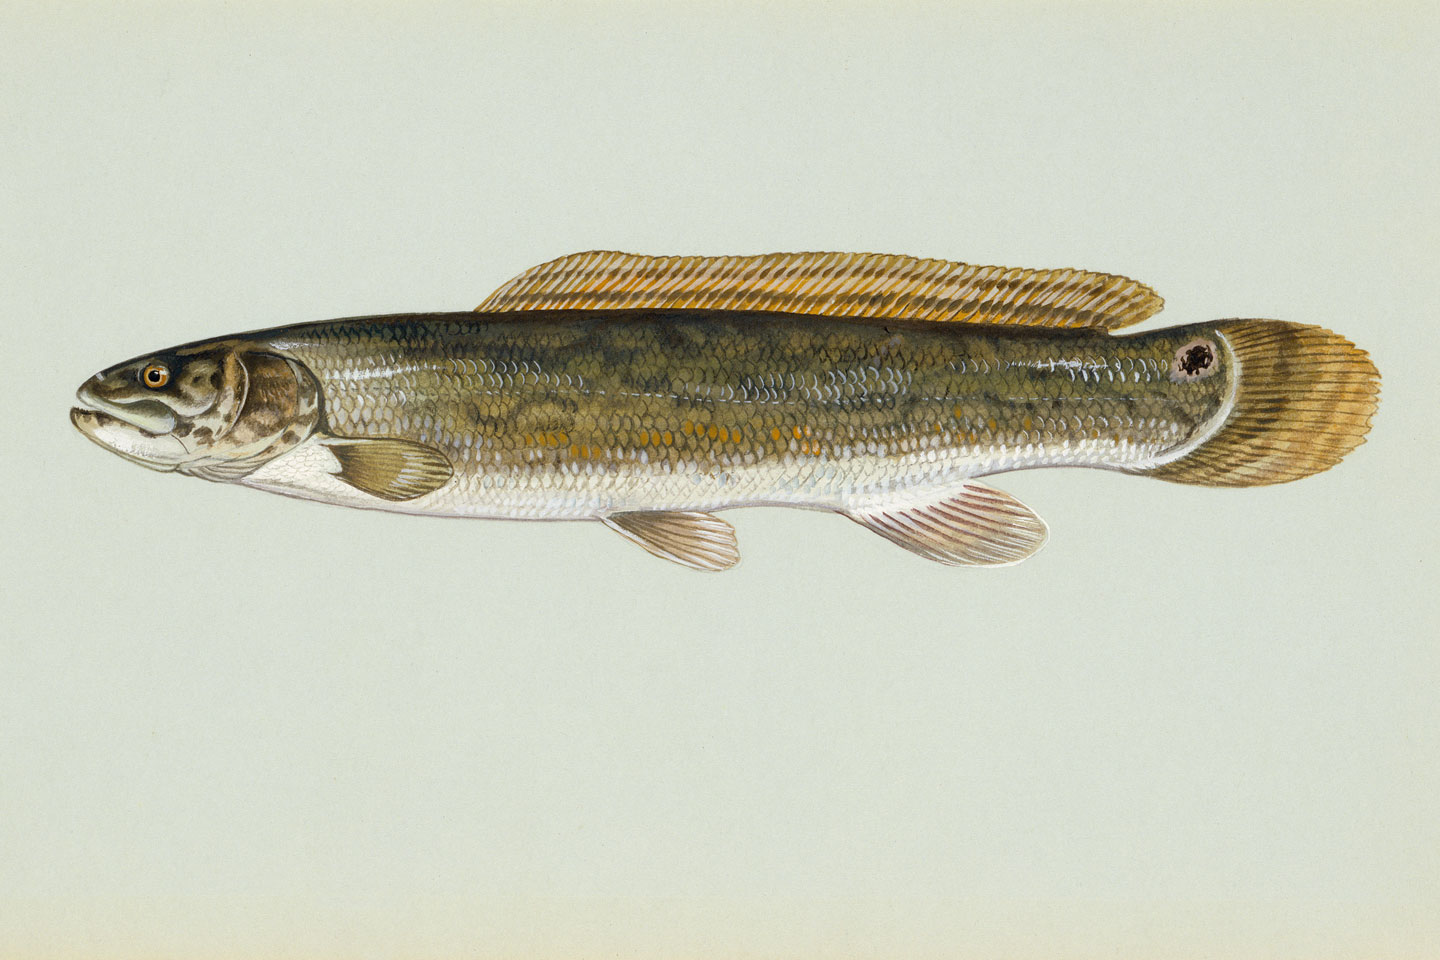 Read More: Bowfin